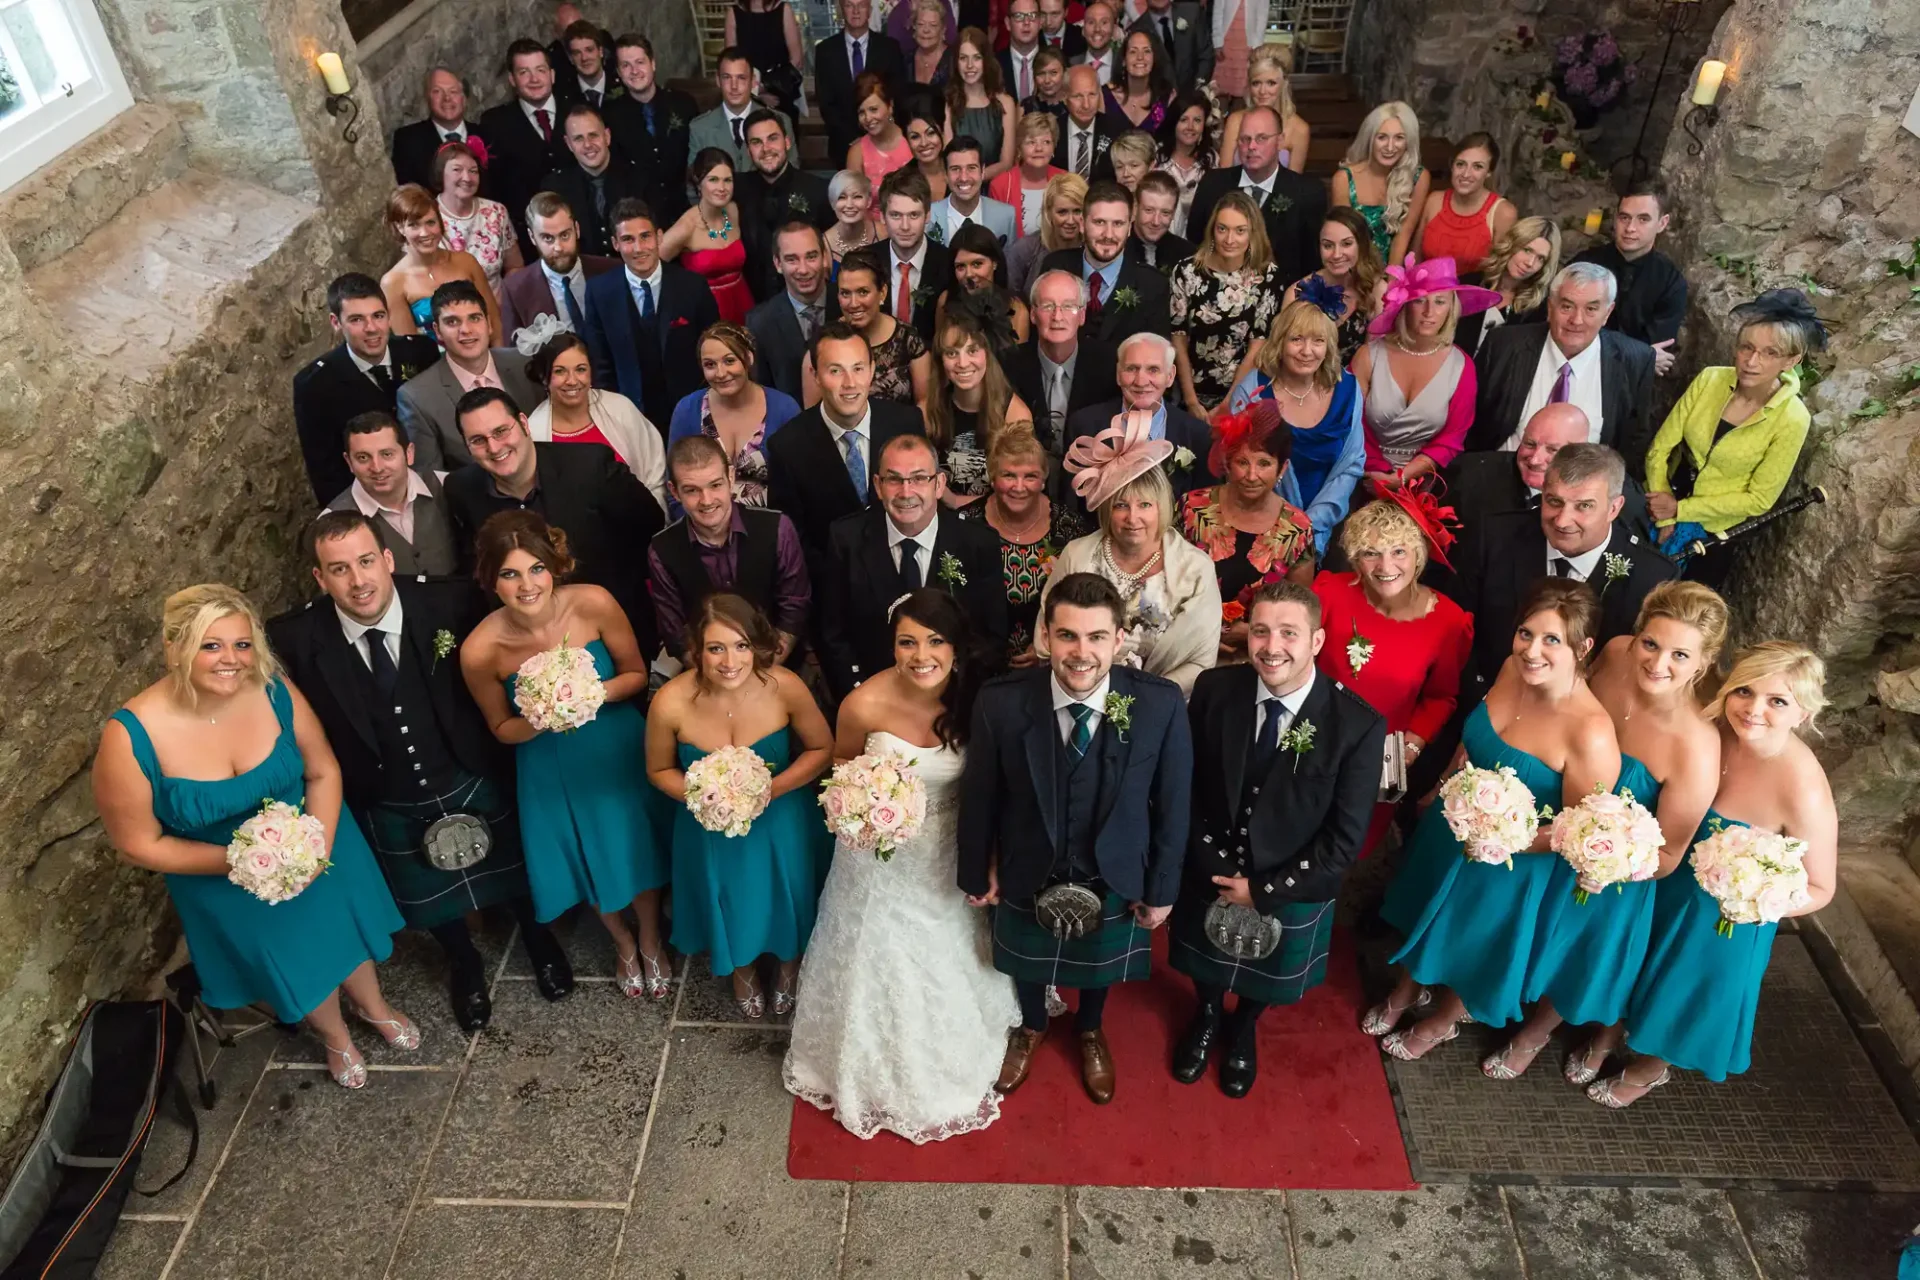 A large wedding group posing on steps, with a couple in front; bridesmaids wear teal dresses, men in kilts.